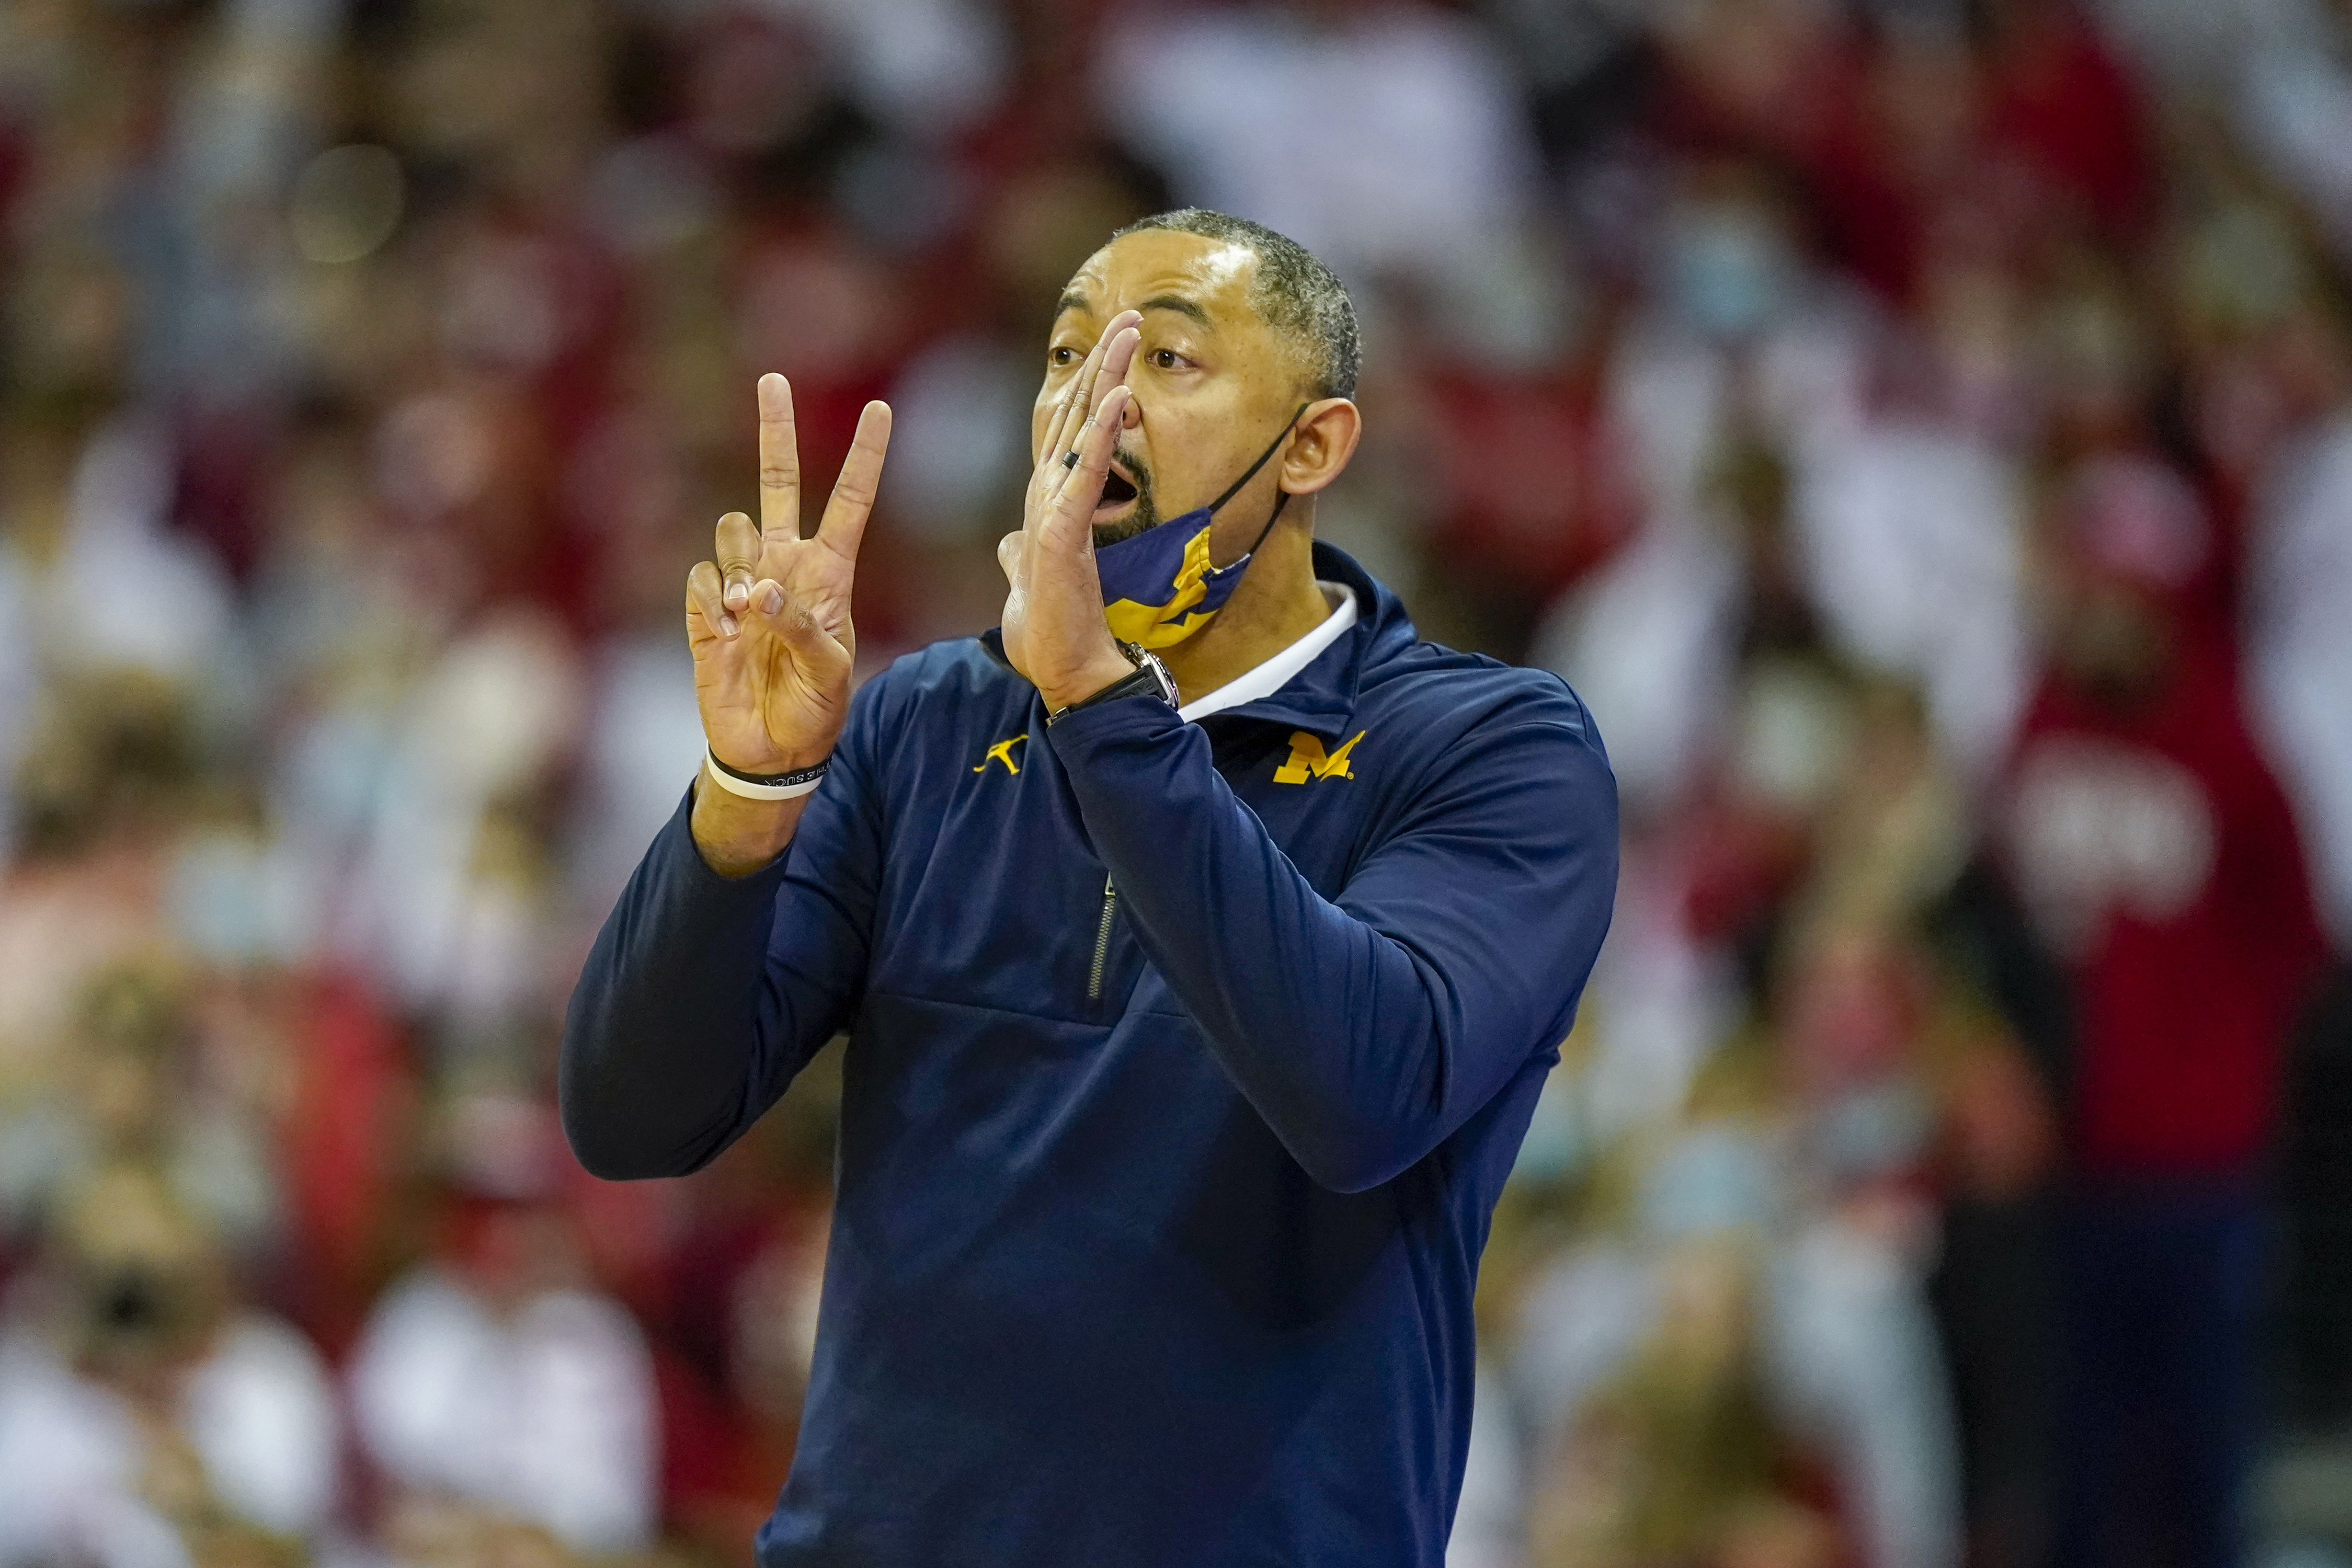 Video: Michigan basketball coach Juwan Howard strikes Wisconsin assistant  after game 